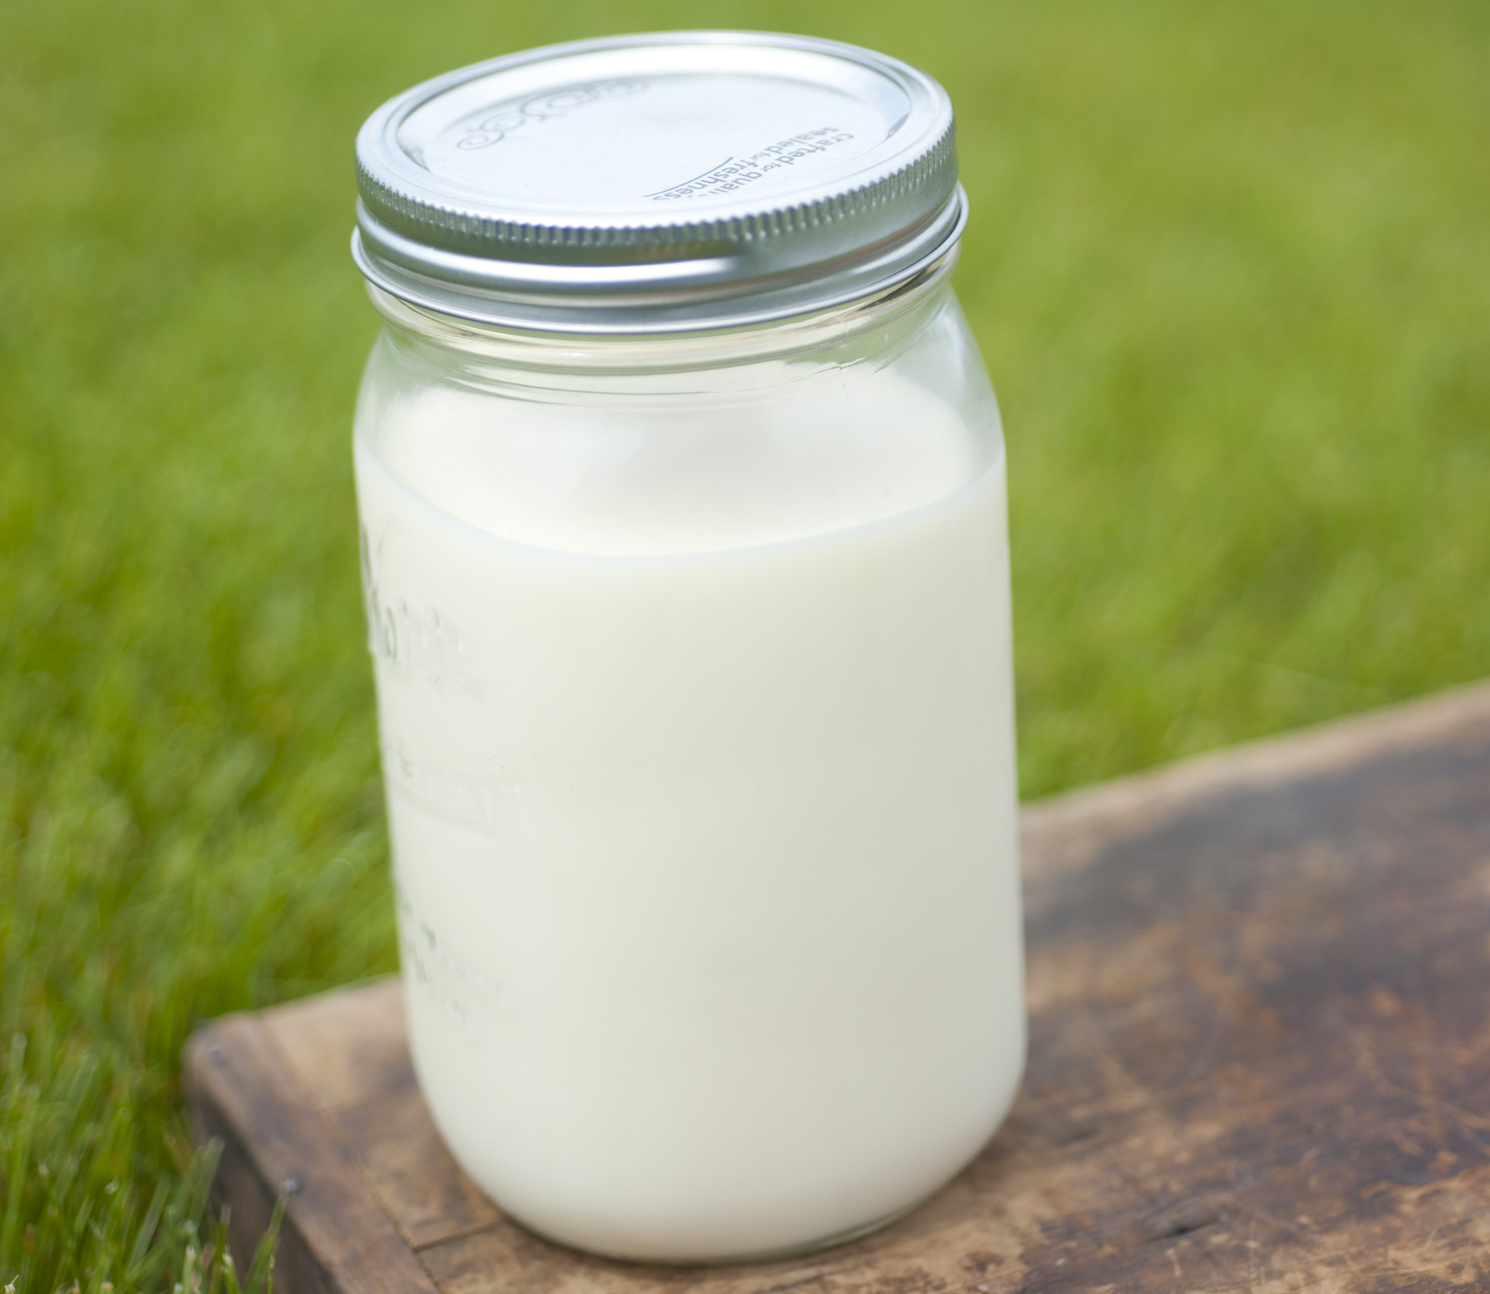 Is it safe to drink raw milk?